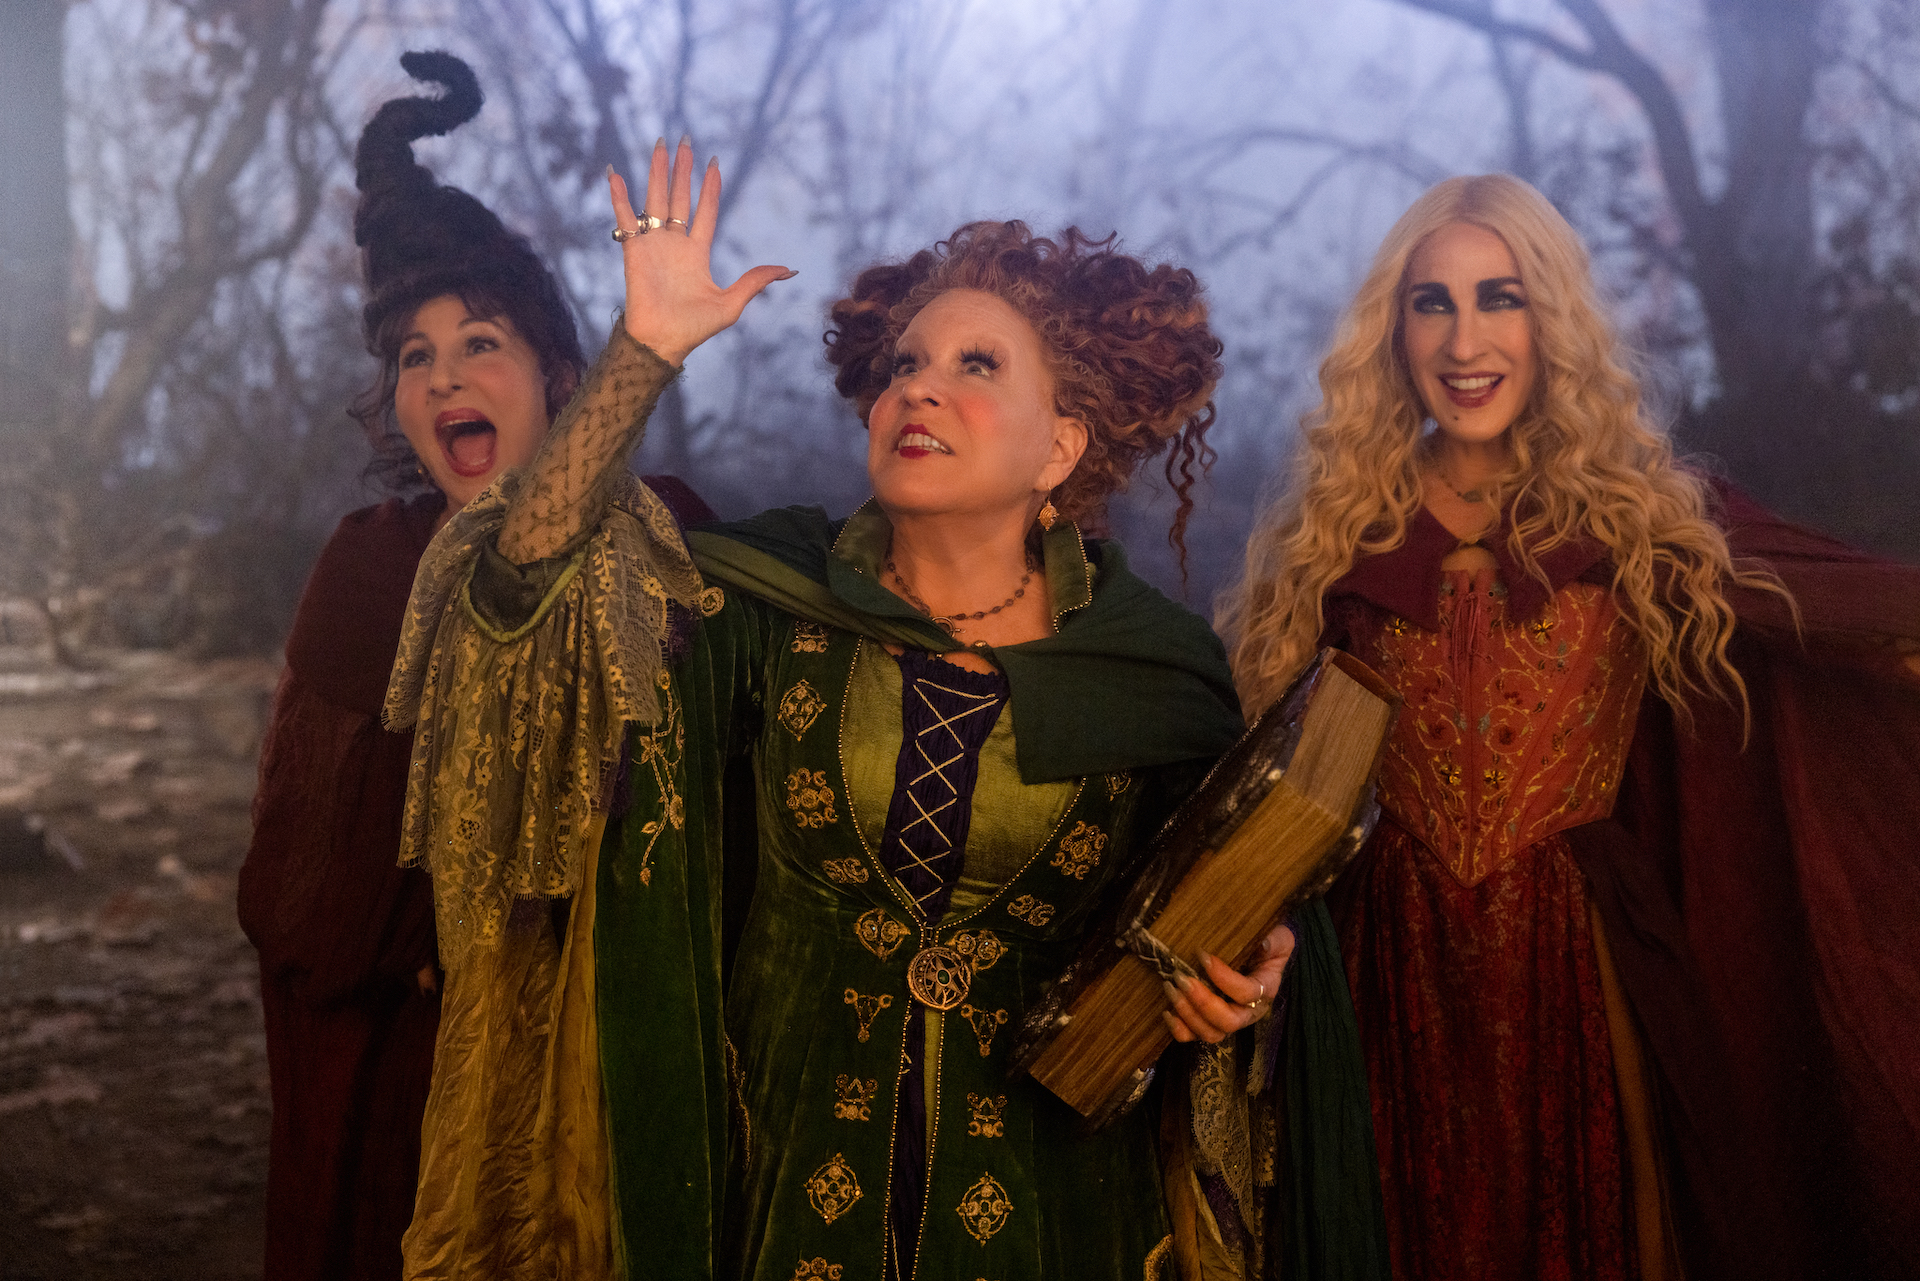 Hold onto your witch hats, the Sanderson sisters are flying their broomsticks all the way to Broadway, with a musical adaption of 'Hocus Pocus.'